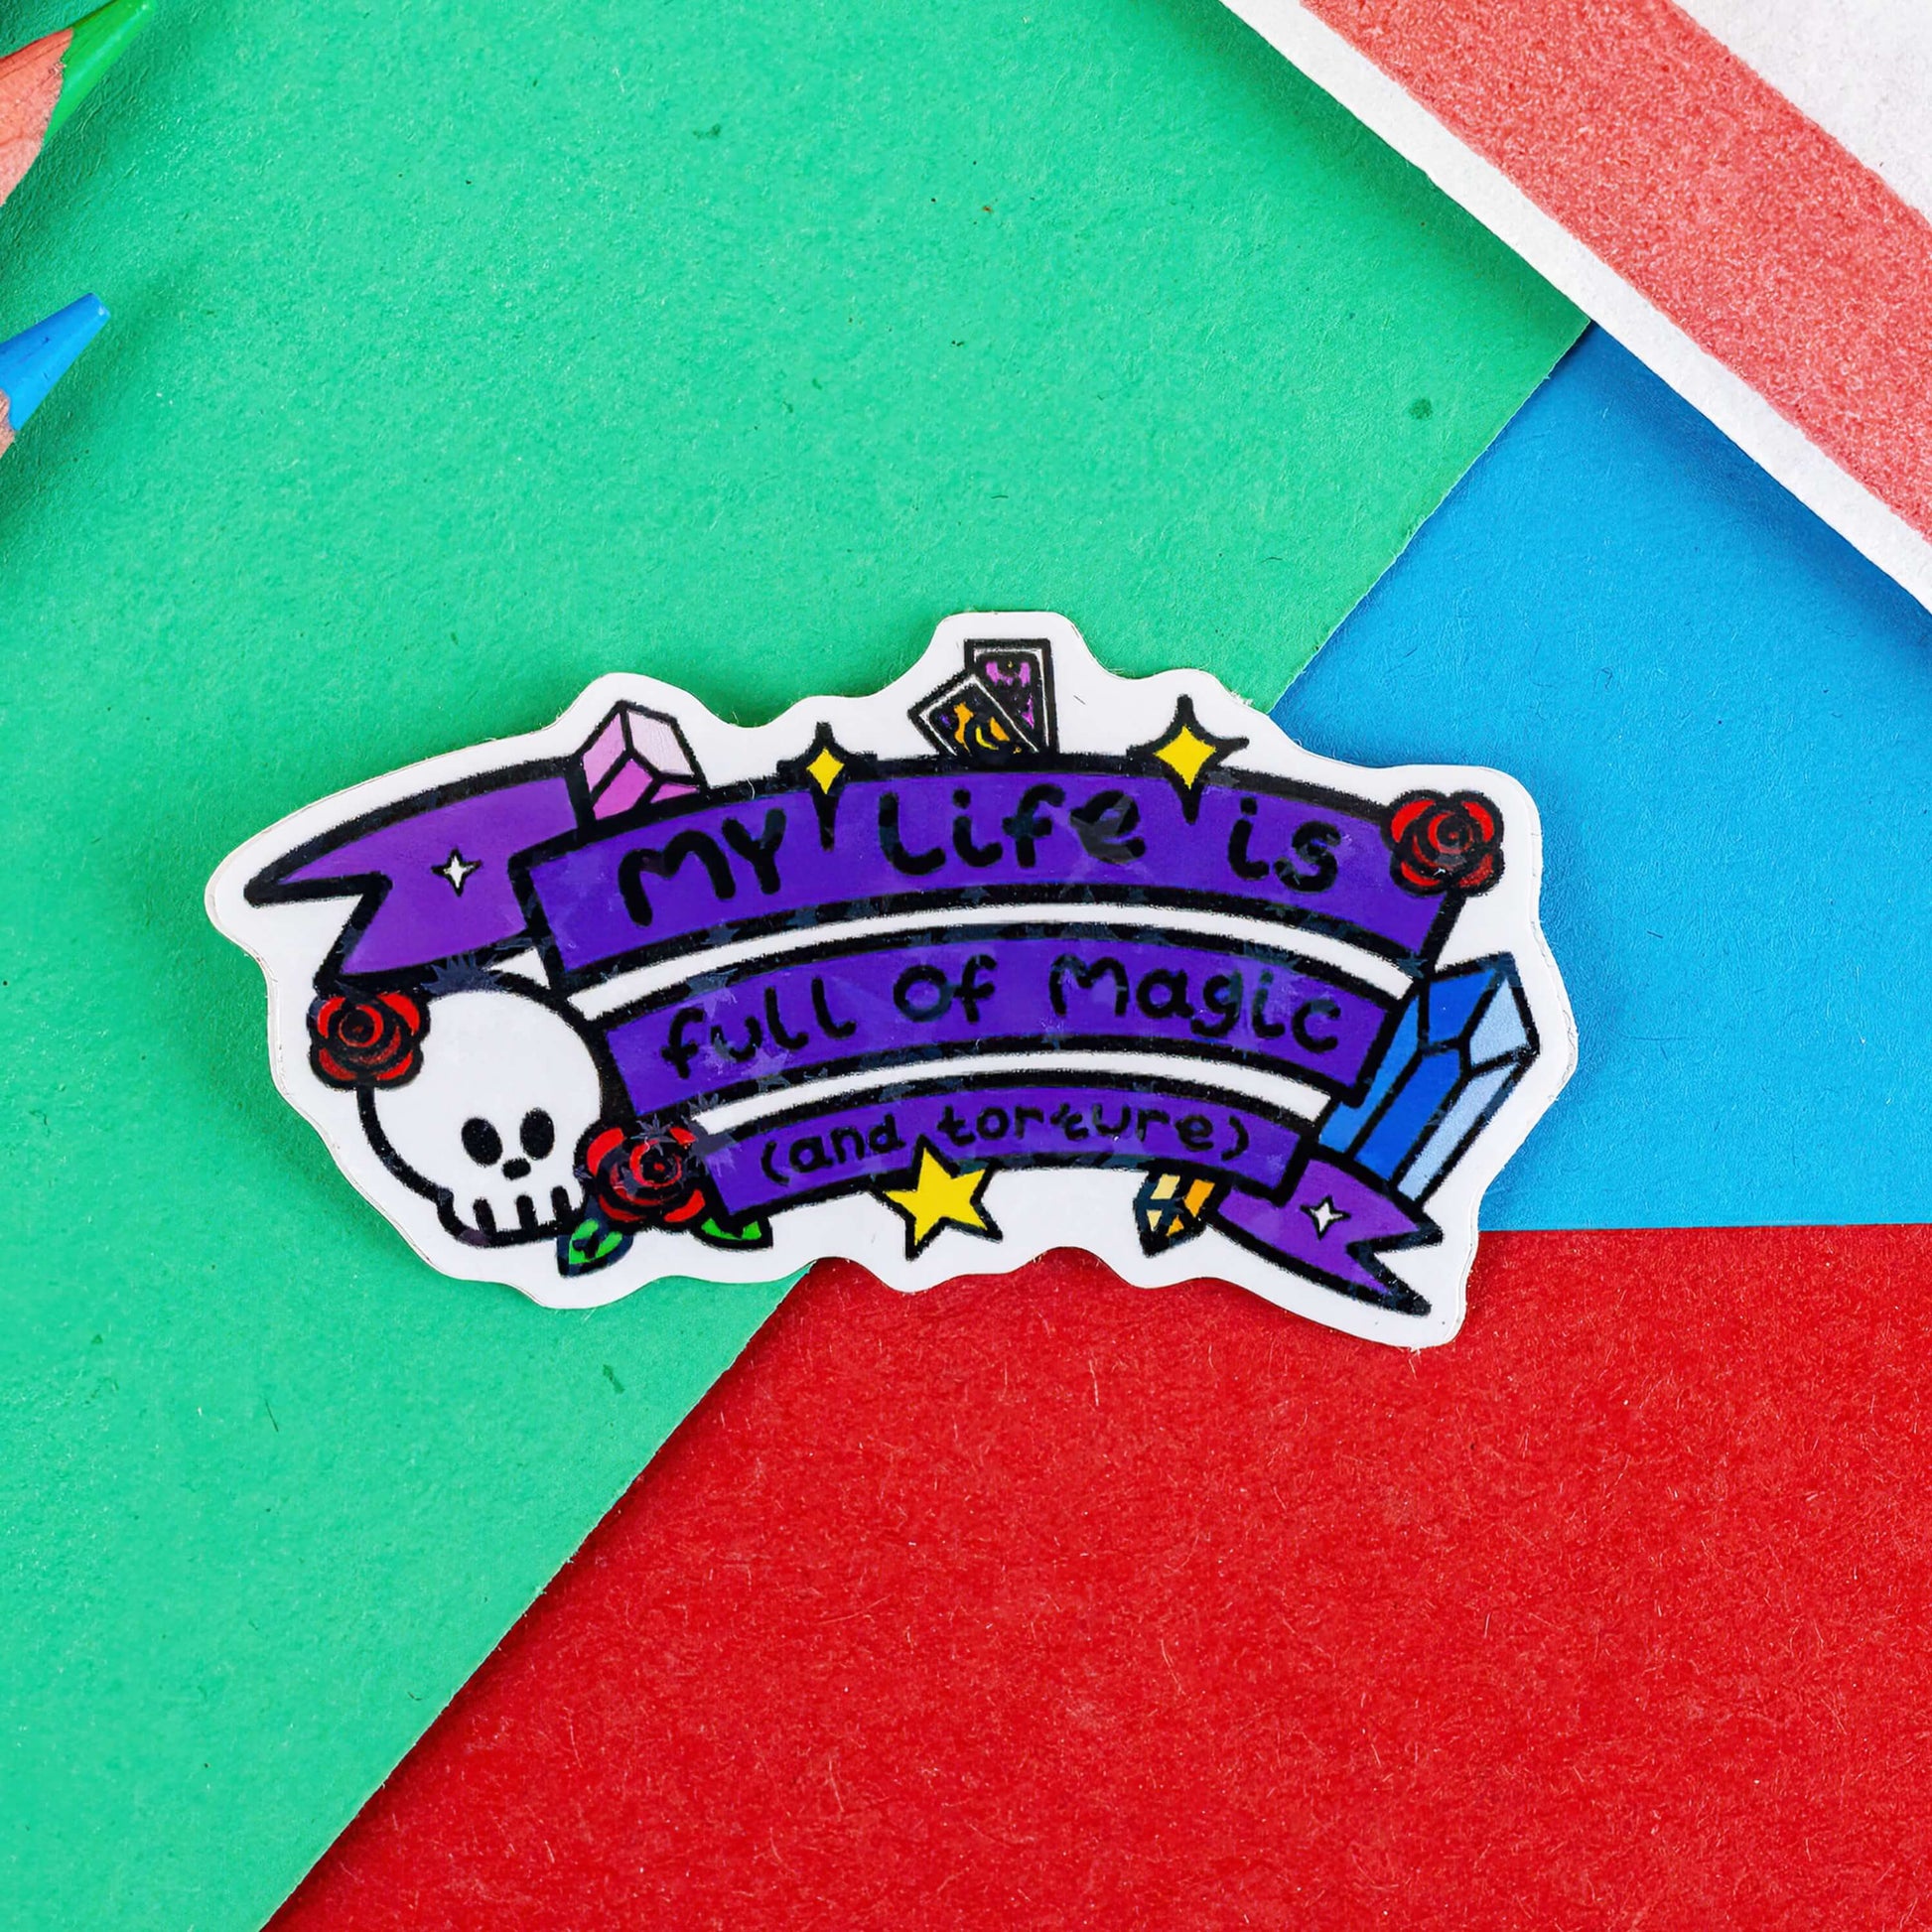 The My Life is Full of Magic & Torture Holographic Sticker on a red, blue and green background with colouring pencils and red stripe candy bag. The holographic stars sticker features a purple banner sash of black text reading 'my life is full of magic (and torture)' with yellow sparkles, crystals, red roses, tarot cards and a skull head.